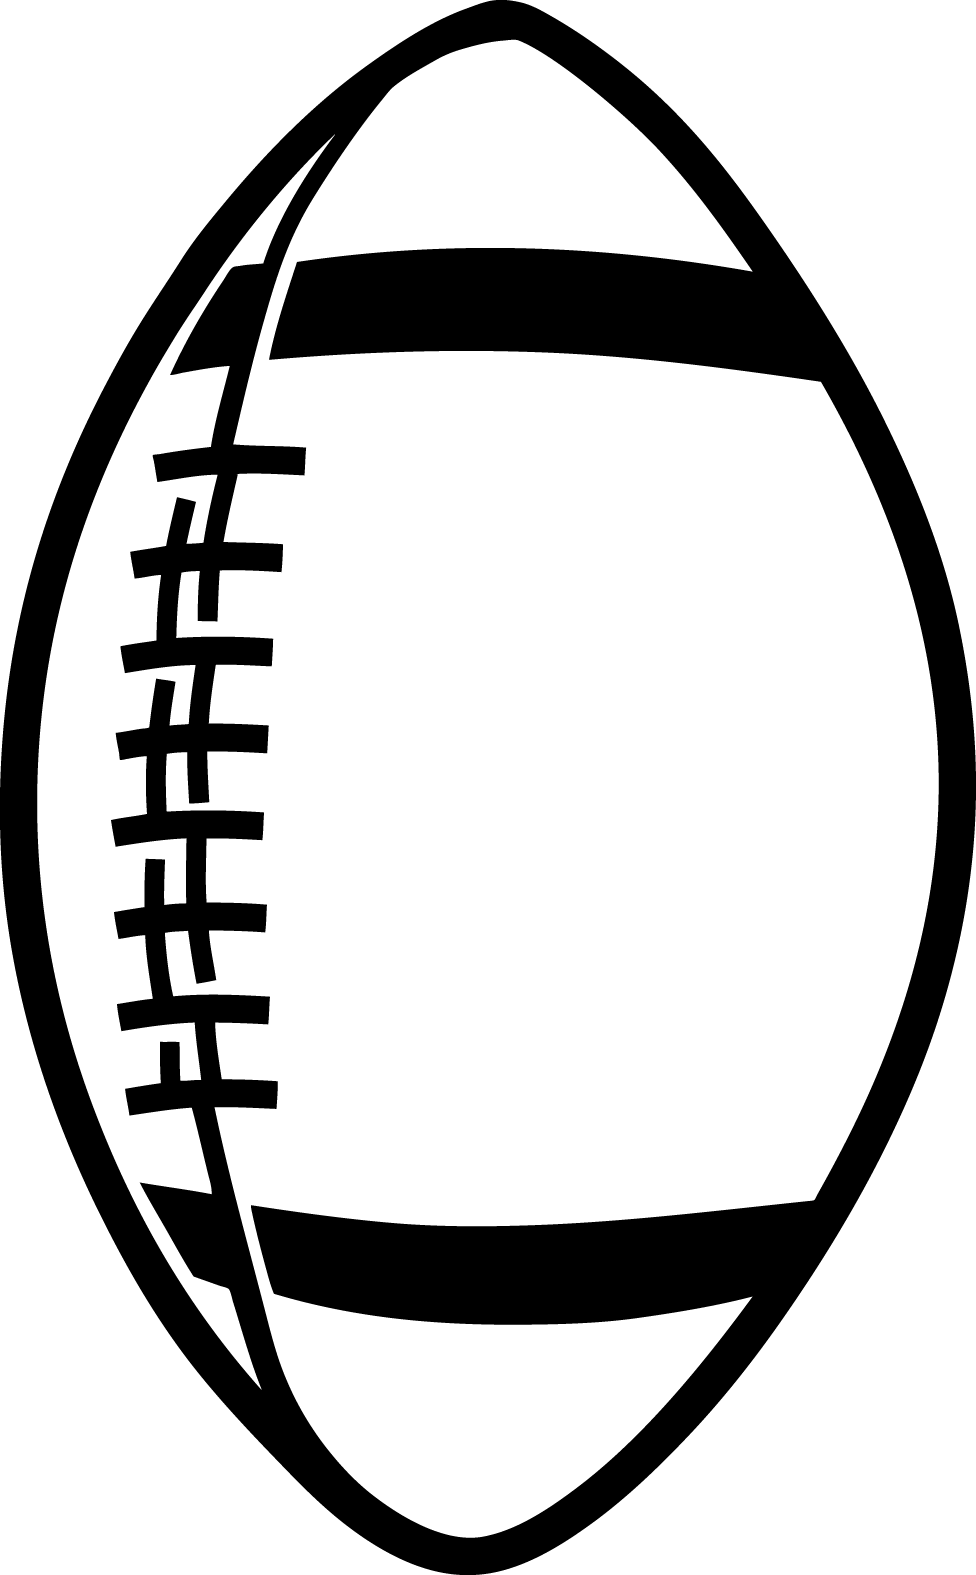 American Football Ball Black And White - ClipArt Best